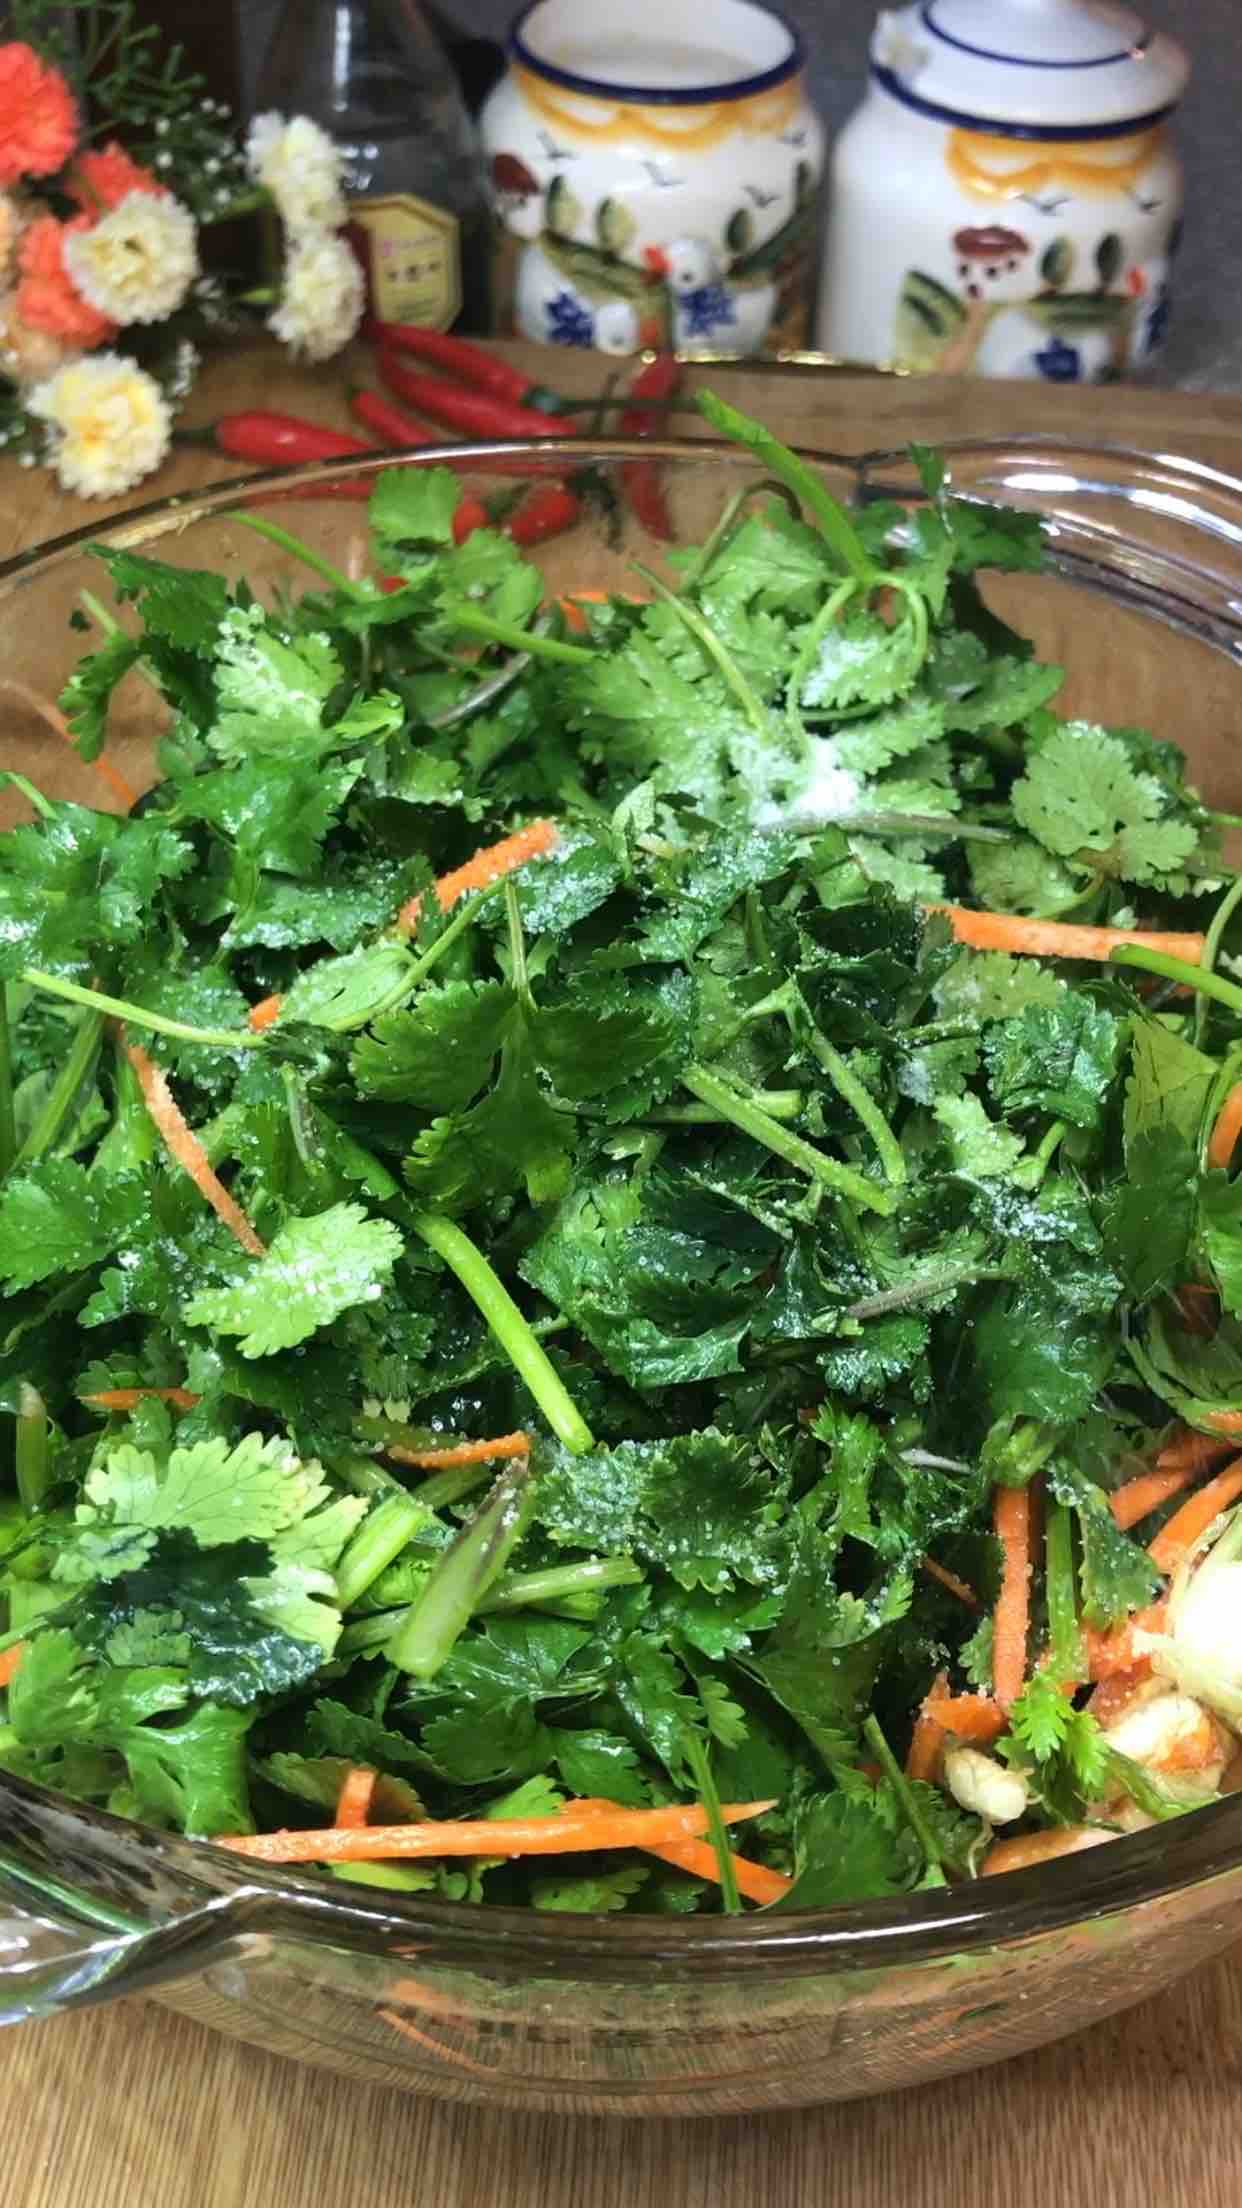 Absolutely Flavored Coriander recipe